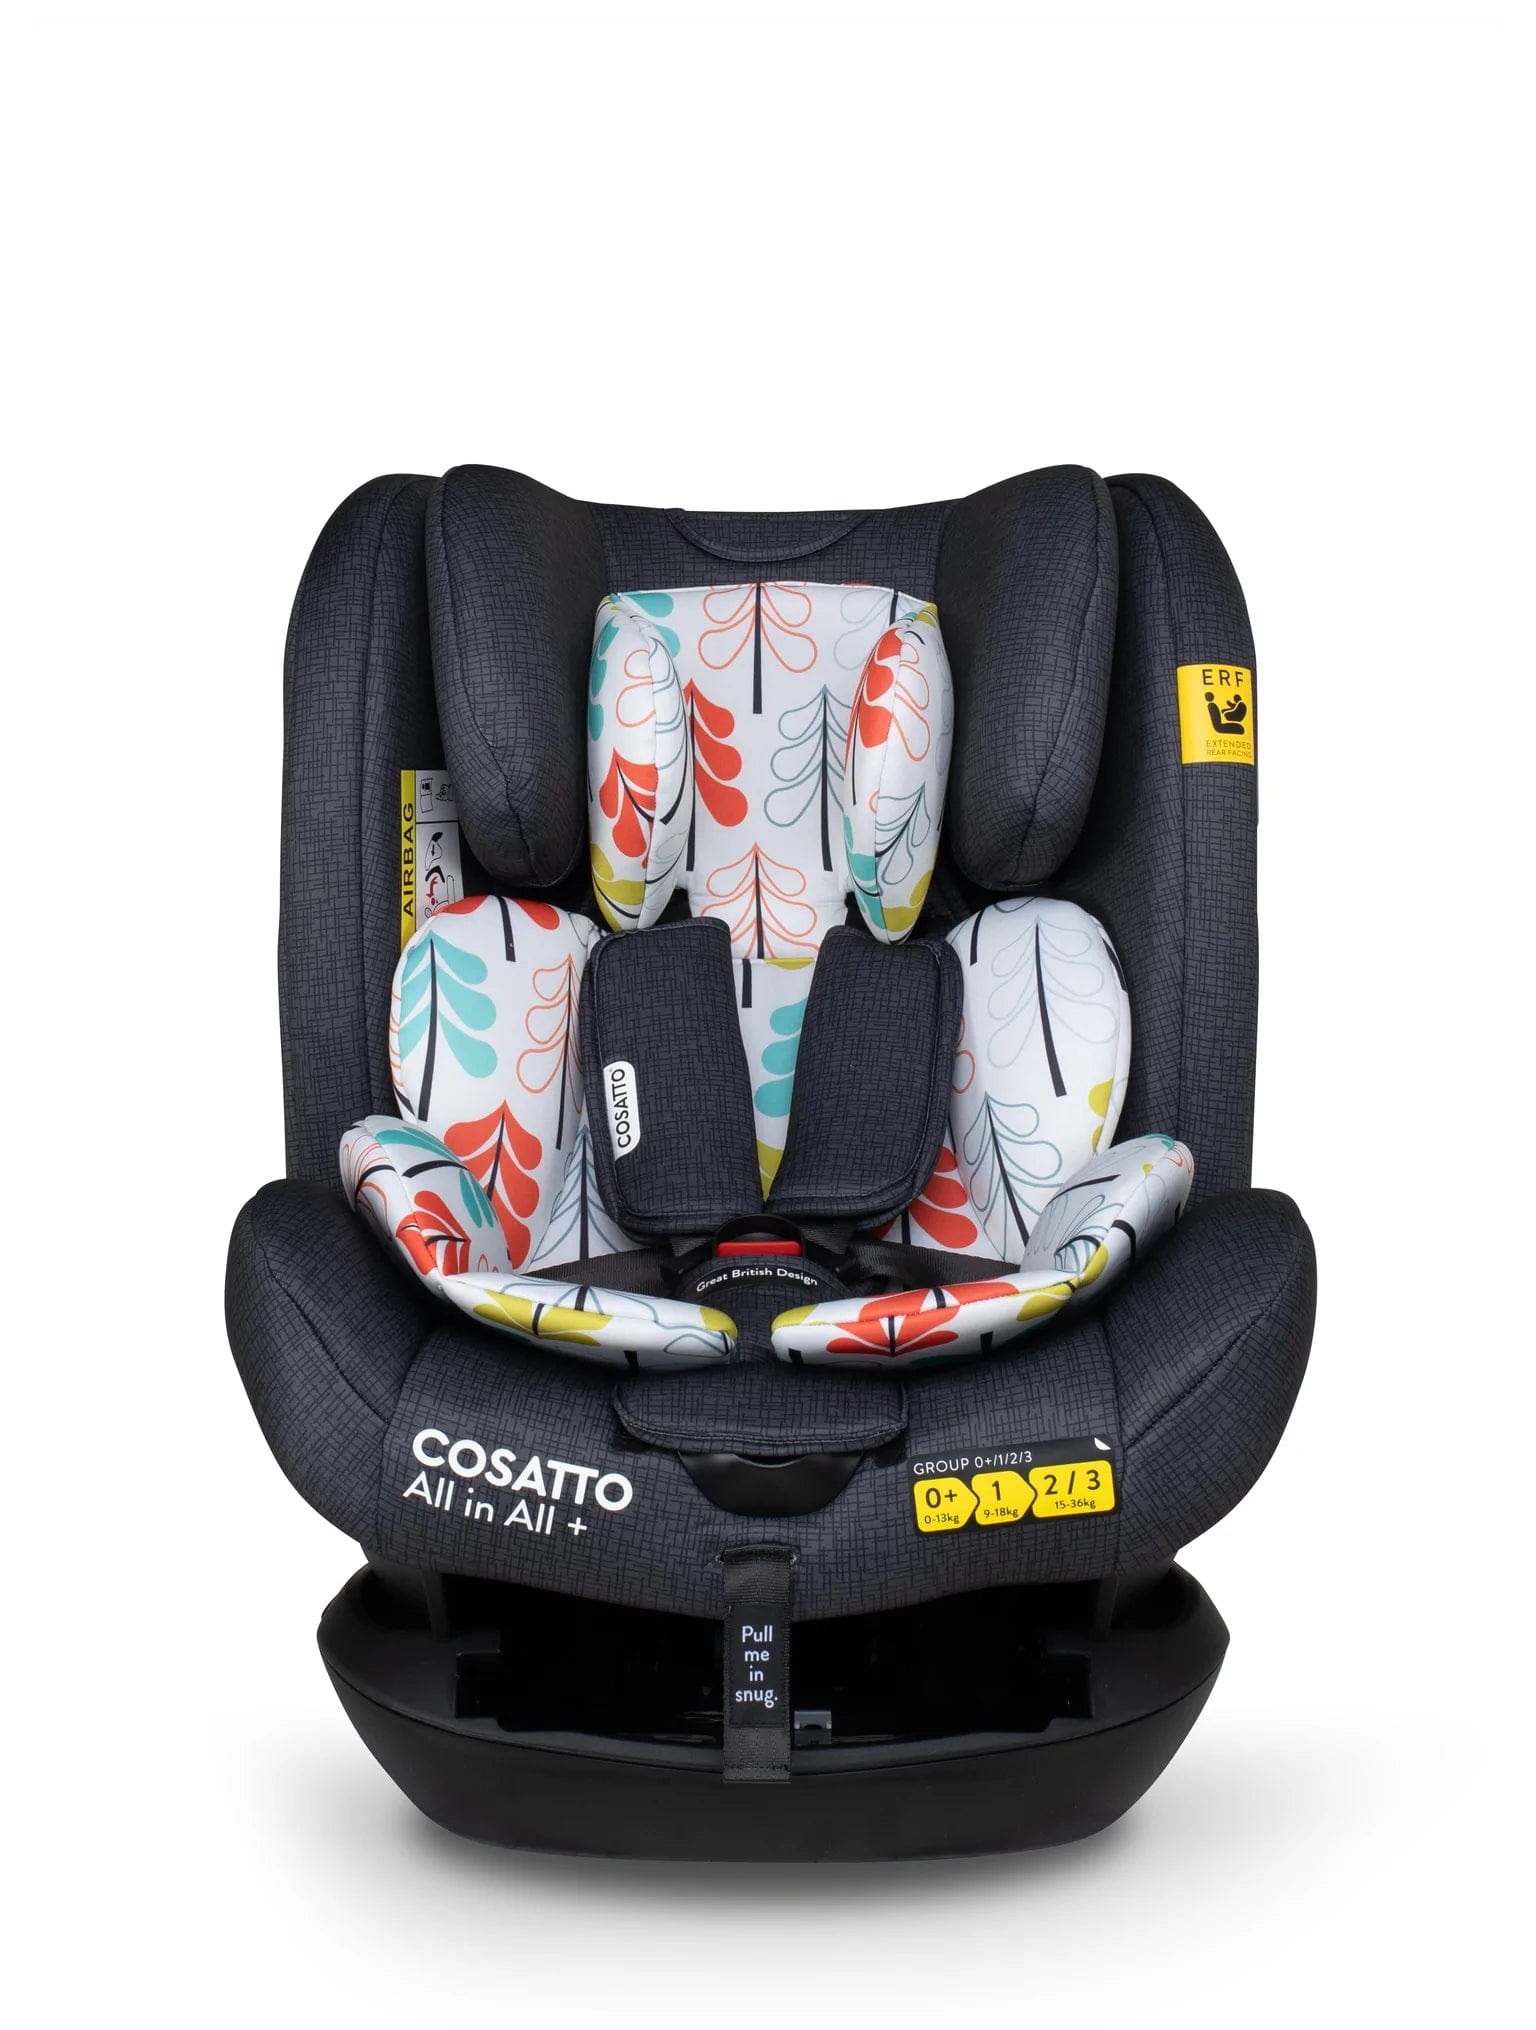 Cosatto Car Seats & Bases Nordik Cosatto All In All + Group 0+123 Car Seat - Direct Delivery